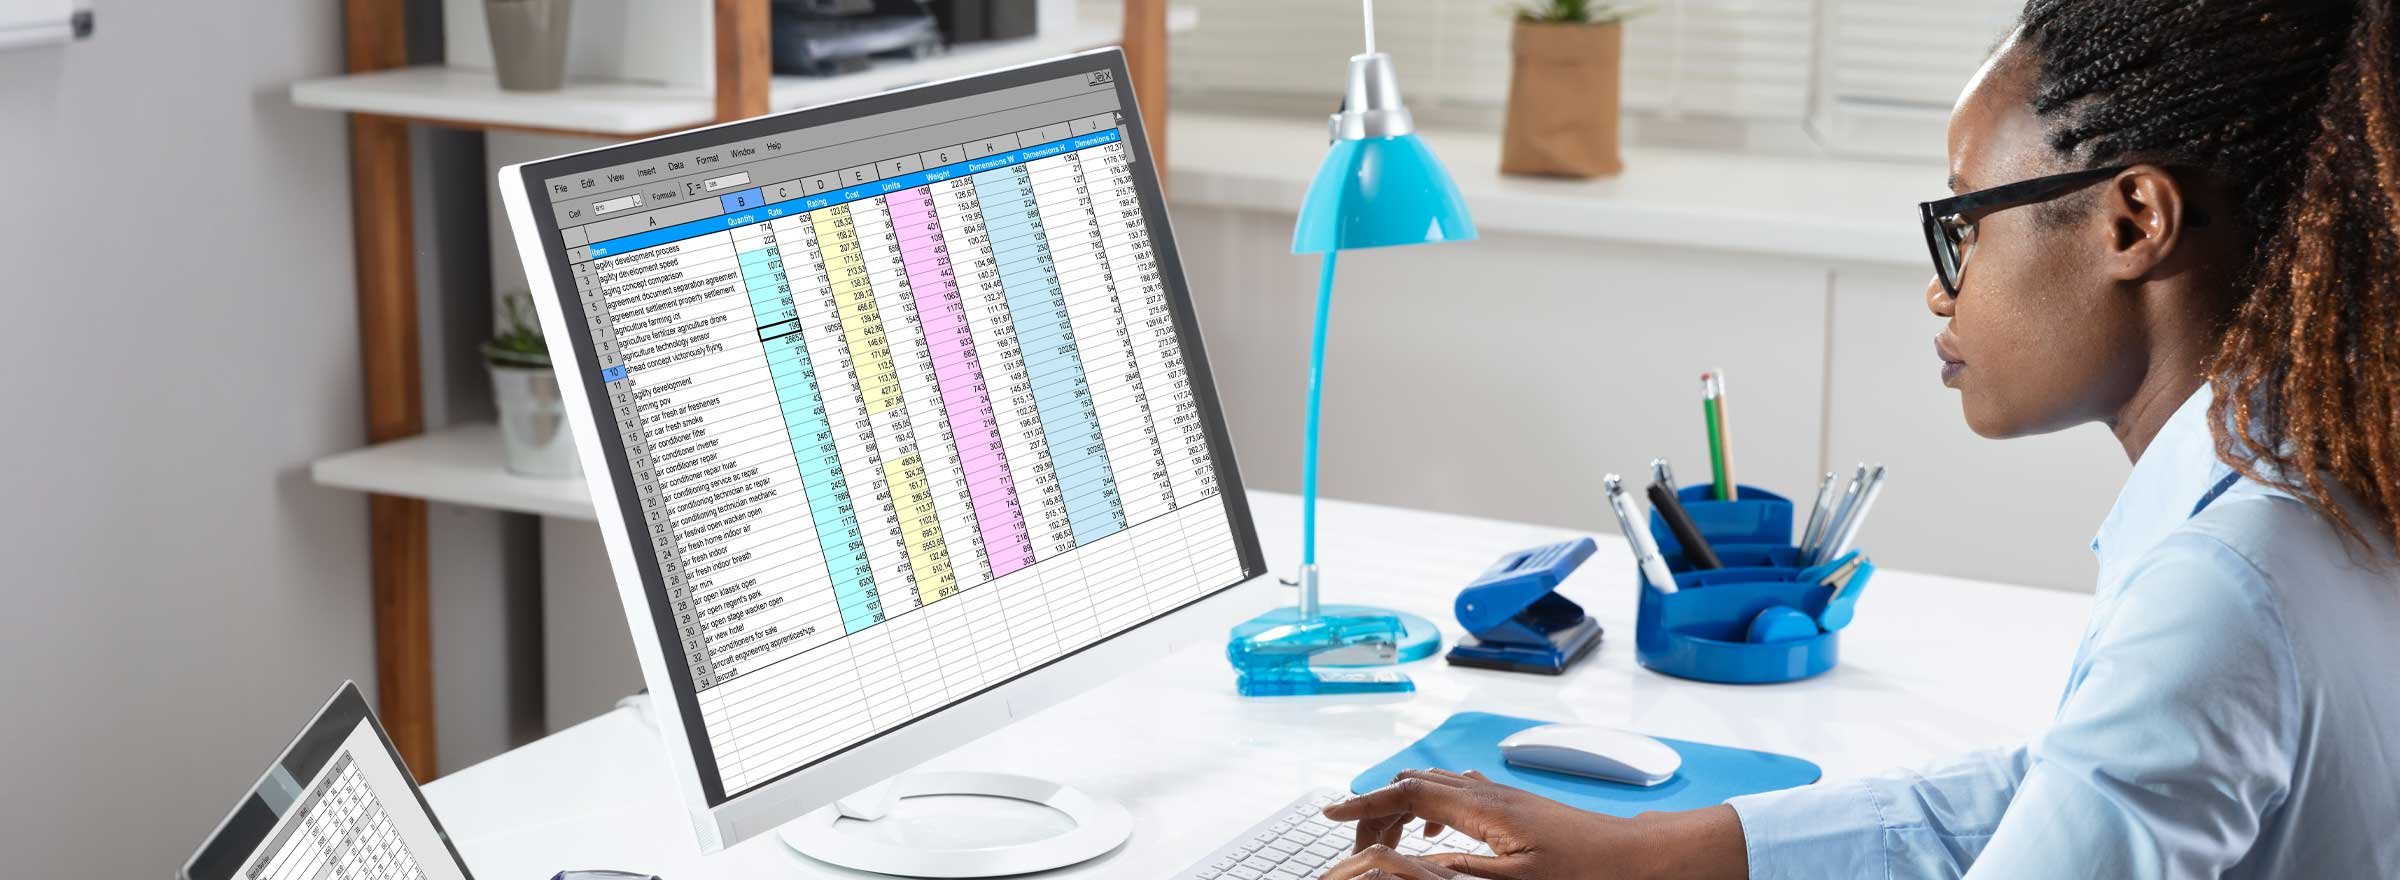 Woman working on a large spreadsheet